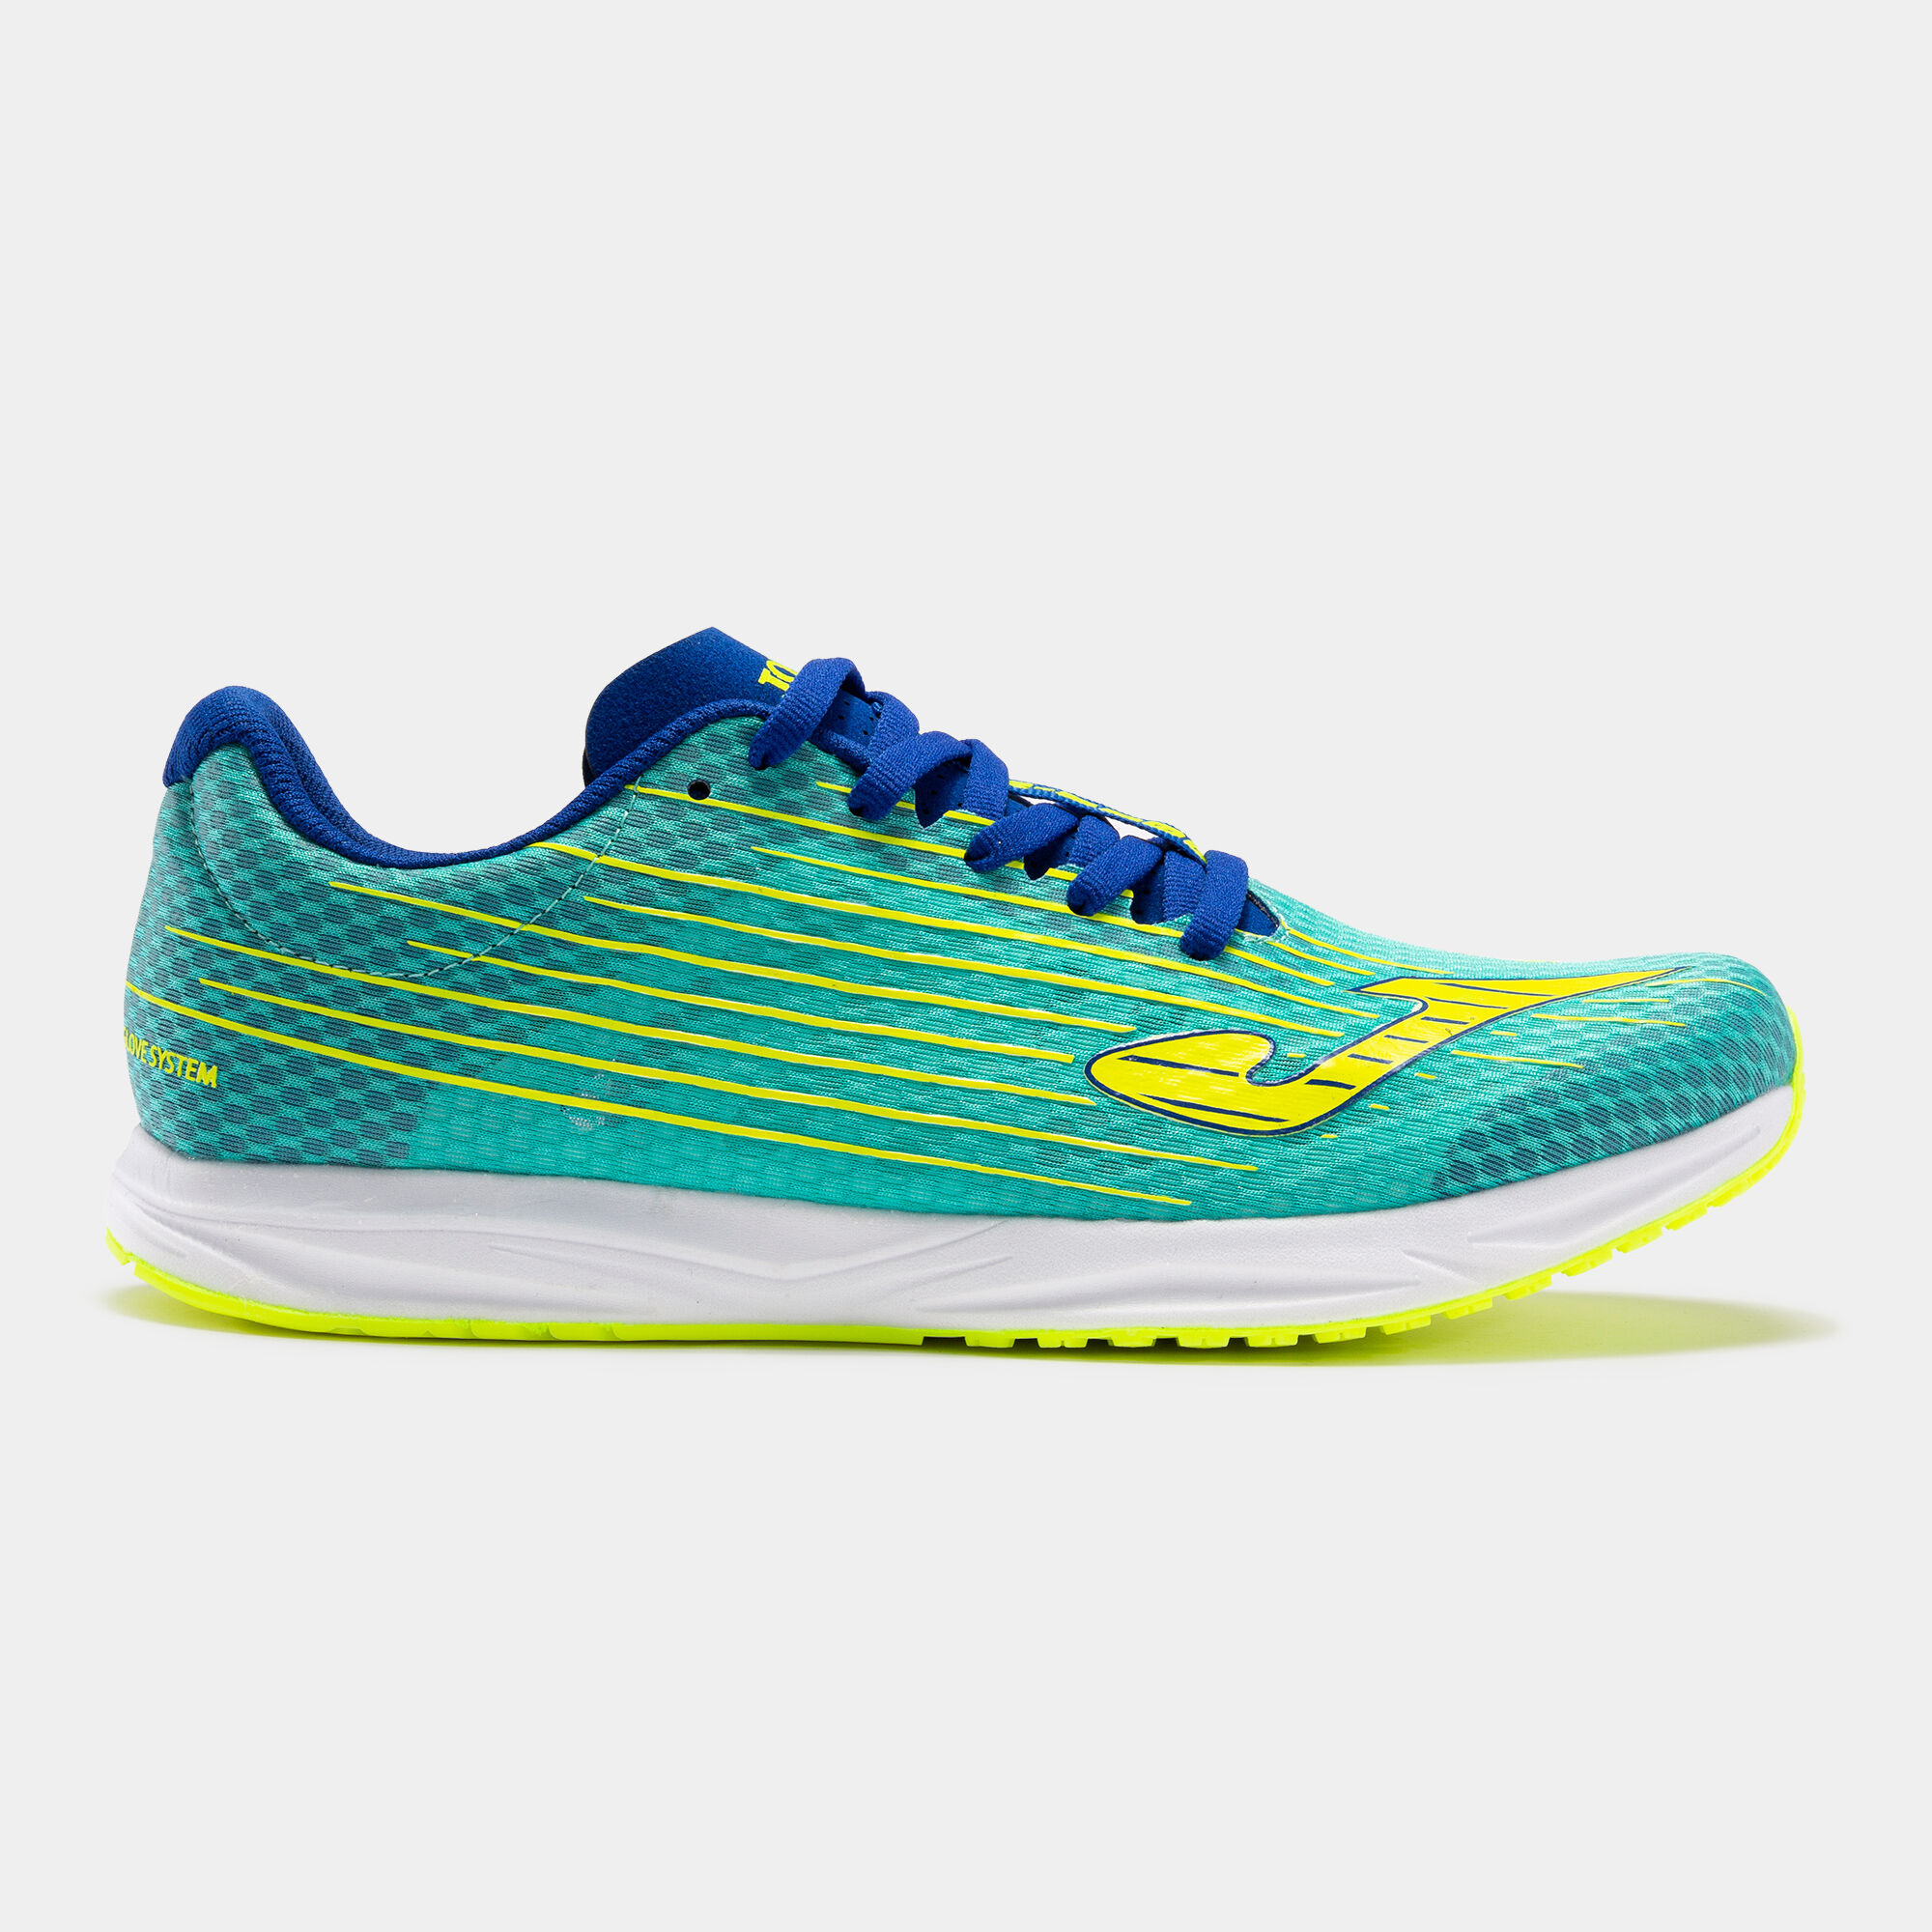 Chaussures running R.5000 23 homme turquoise